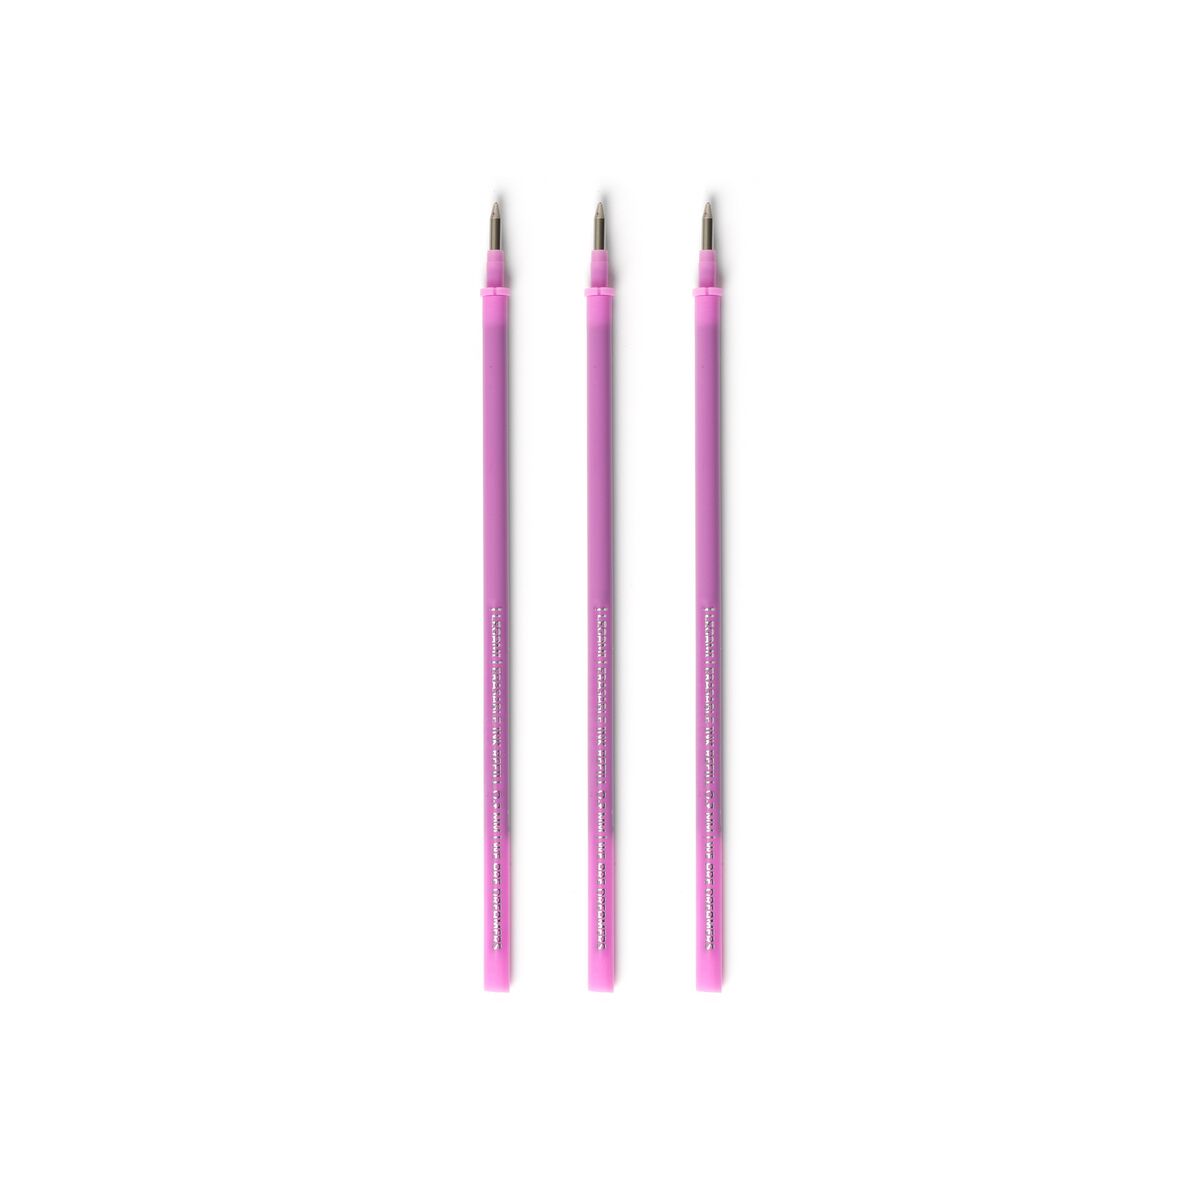  Legami Refill for Erasable Gel Pen, Set of 3 Refills, 13 cm  Height, Pink Thermosensitive Ink, 0.7 mm Tip : Office Products